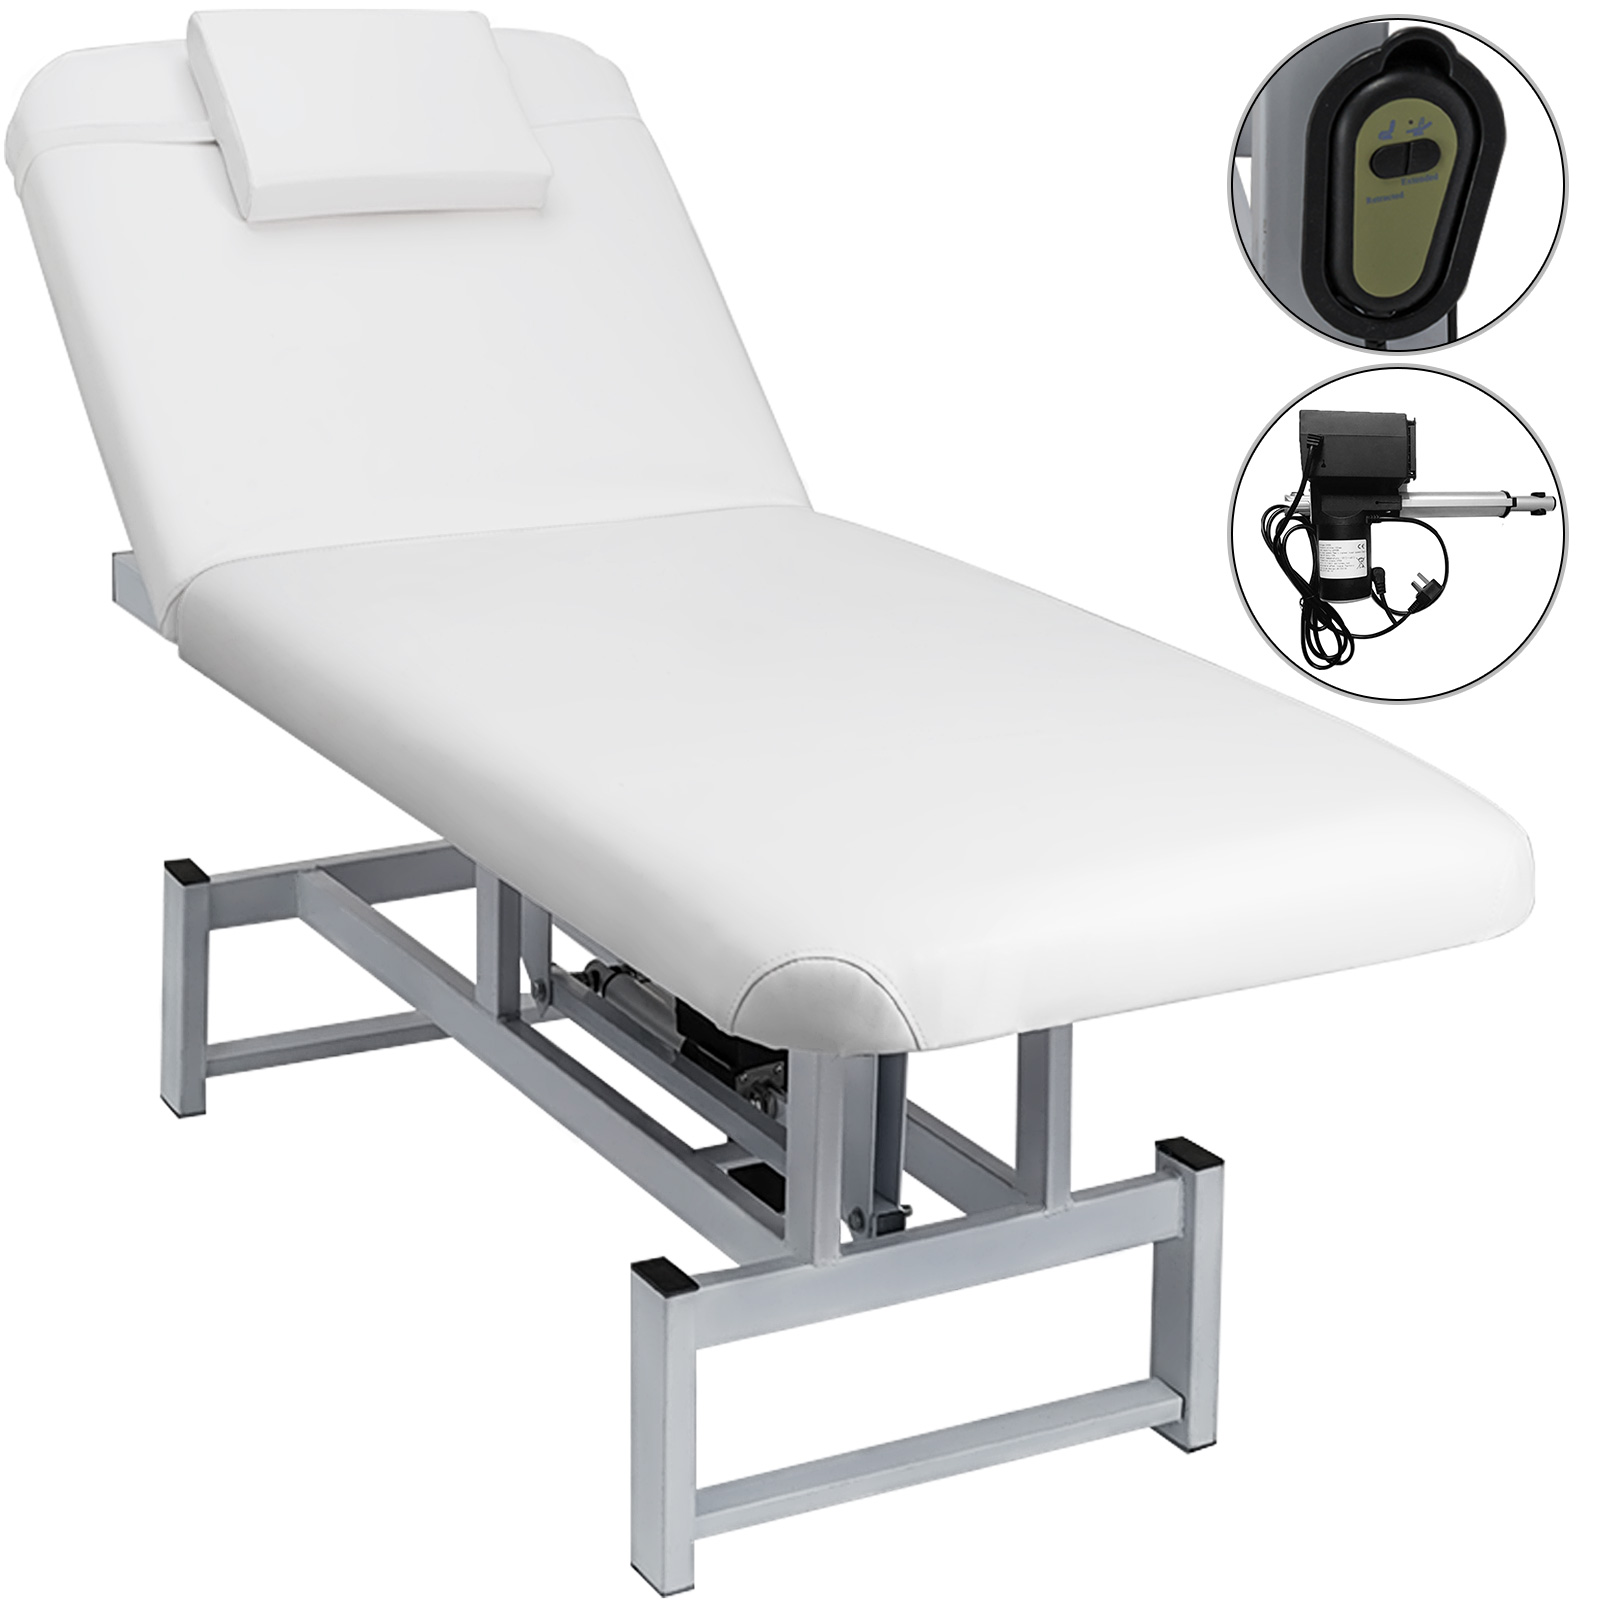 Electric Facial Chair Massage Table Bed Adjustable Remote Control Quiet